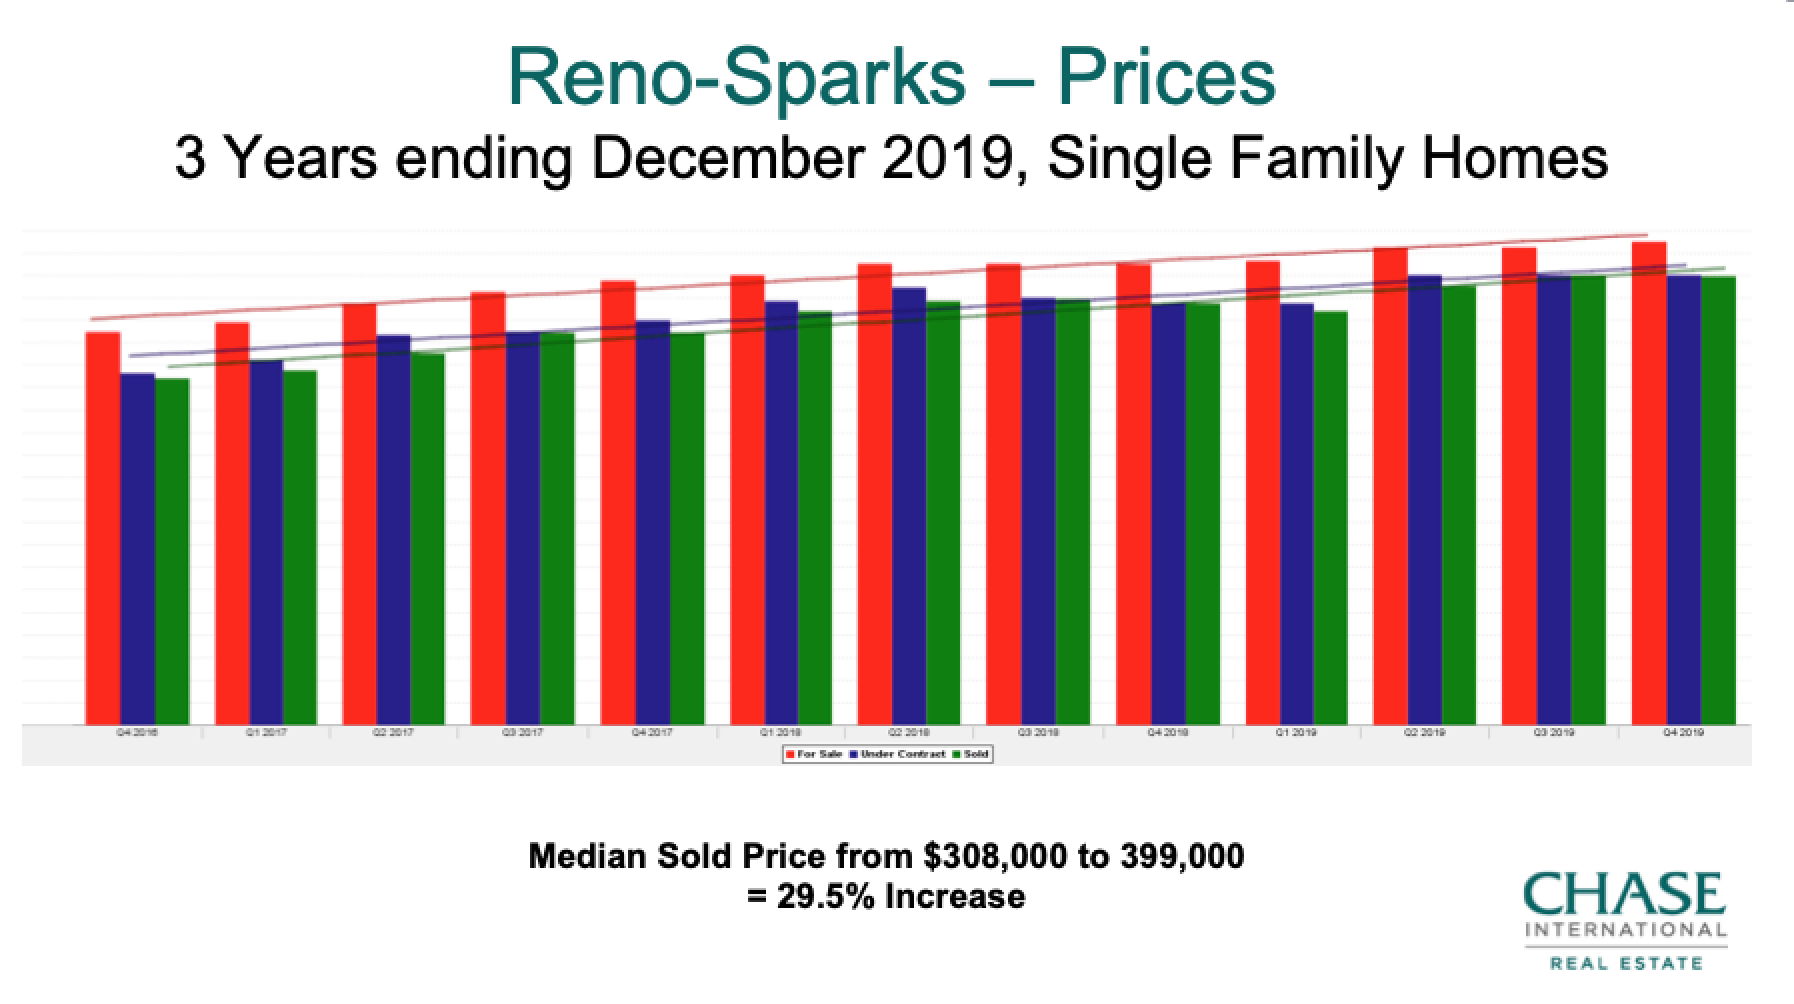 Reno-Sparks 3-Year Pricing Trend